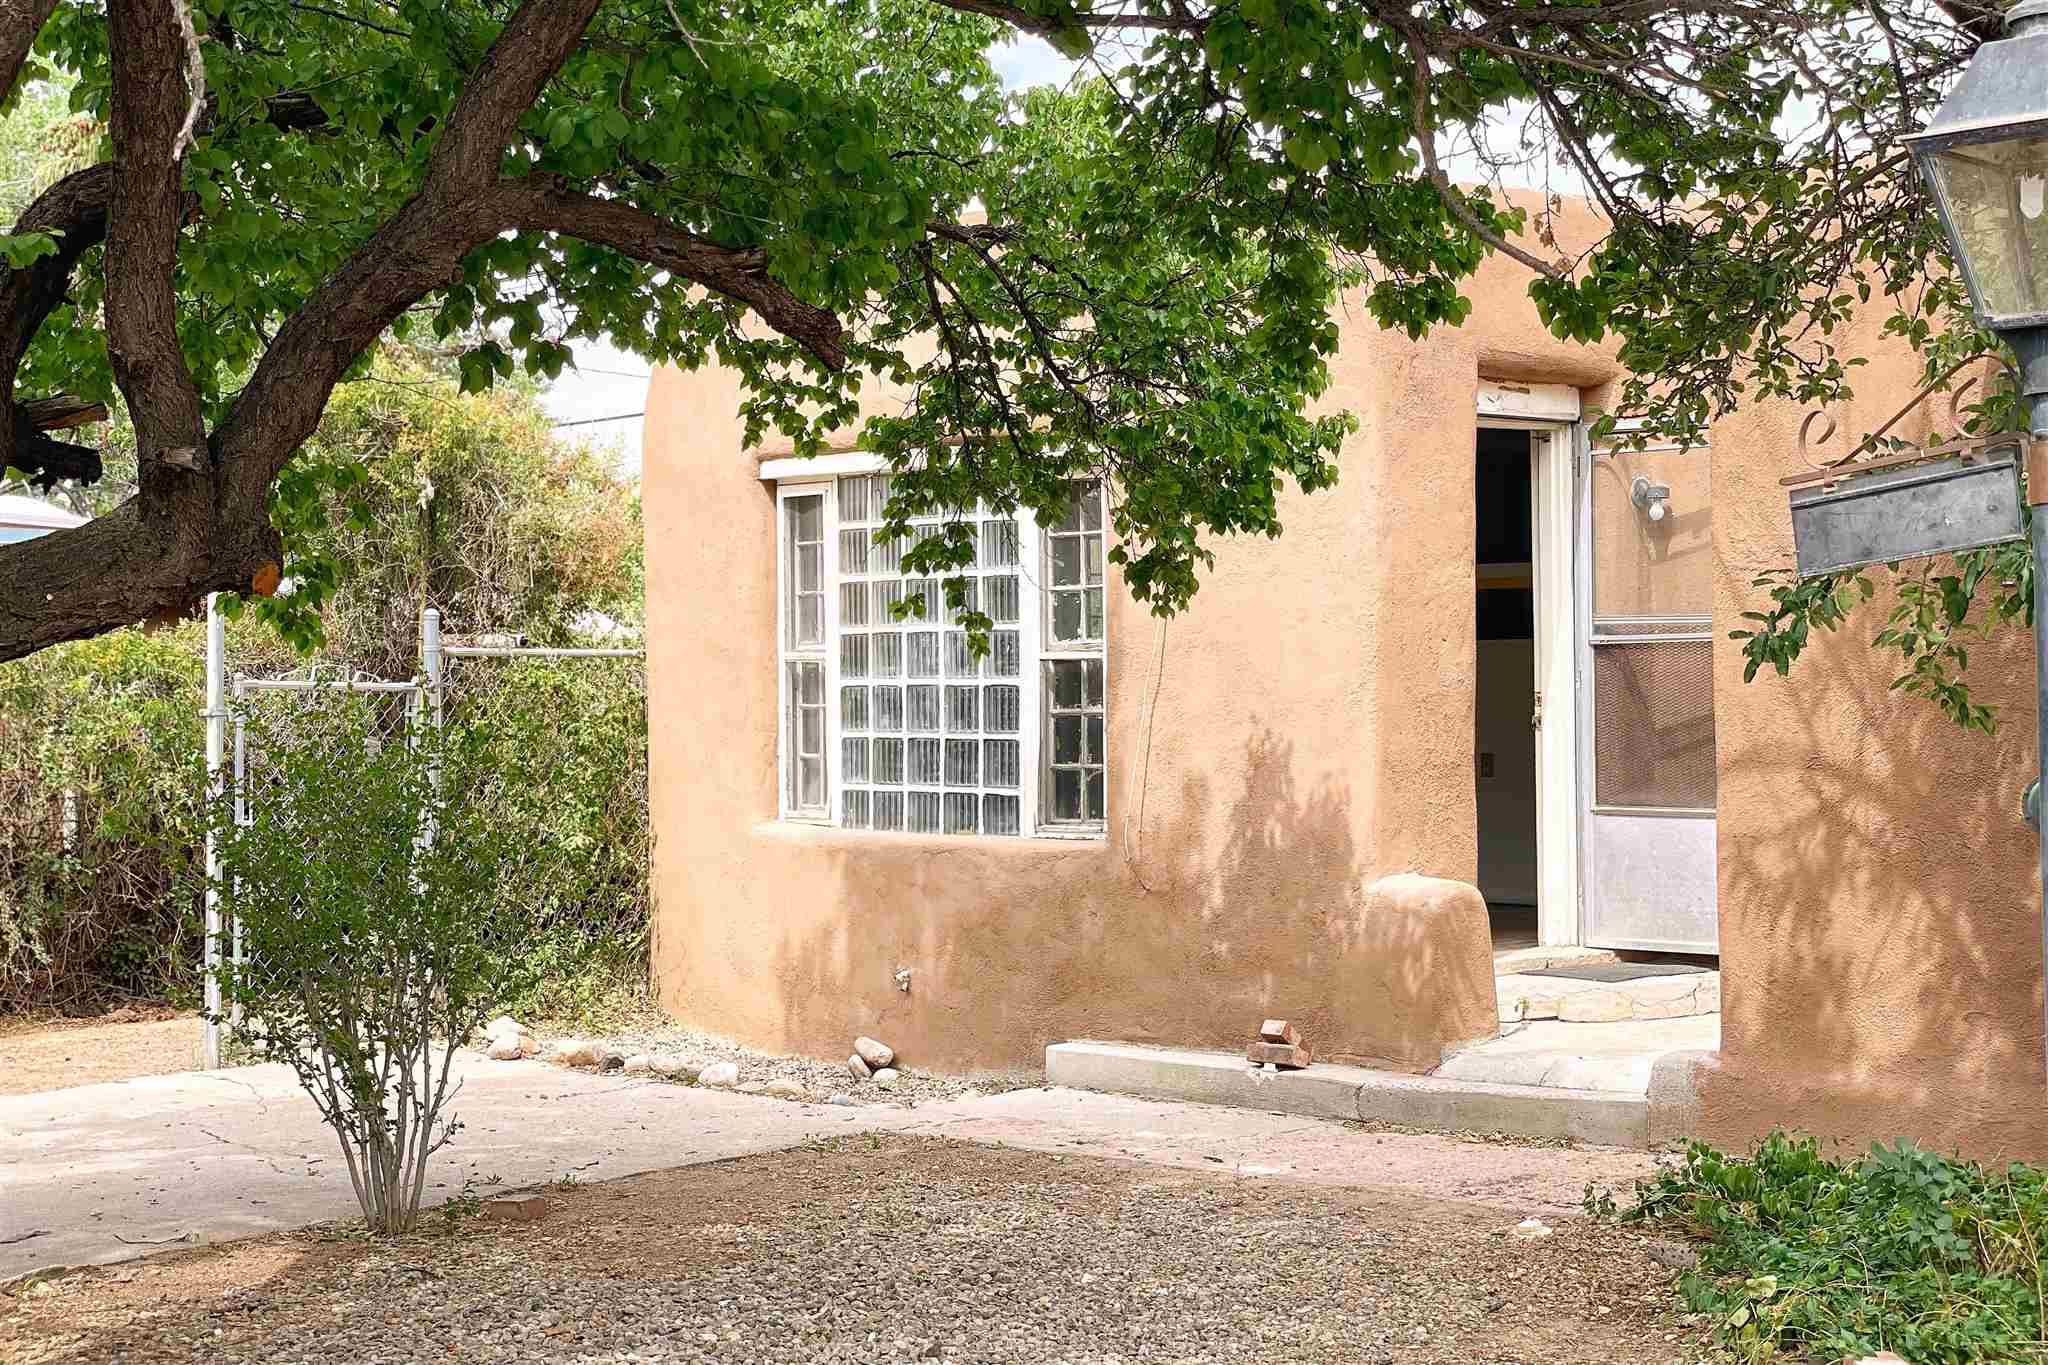 849 Don Diego, Santa Fe, New Mexico 87505, 4 Bedrooms Bedrooms, ,3 BathroomsBathrooms,Residential,For Sale,849 Don Diego,202102729